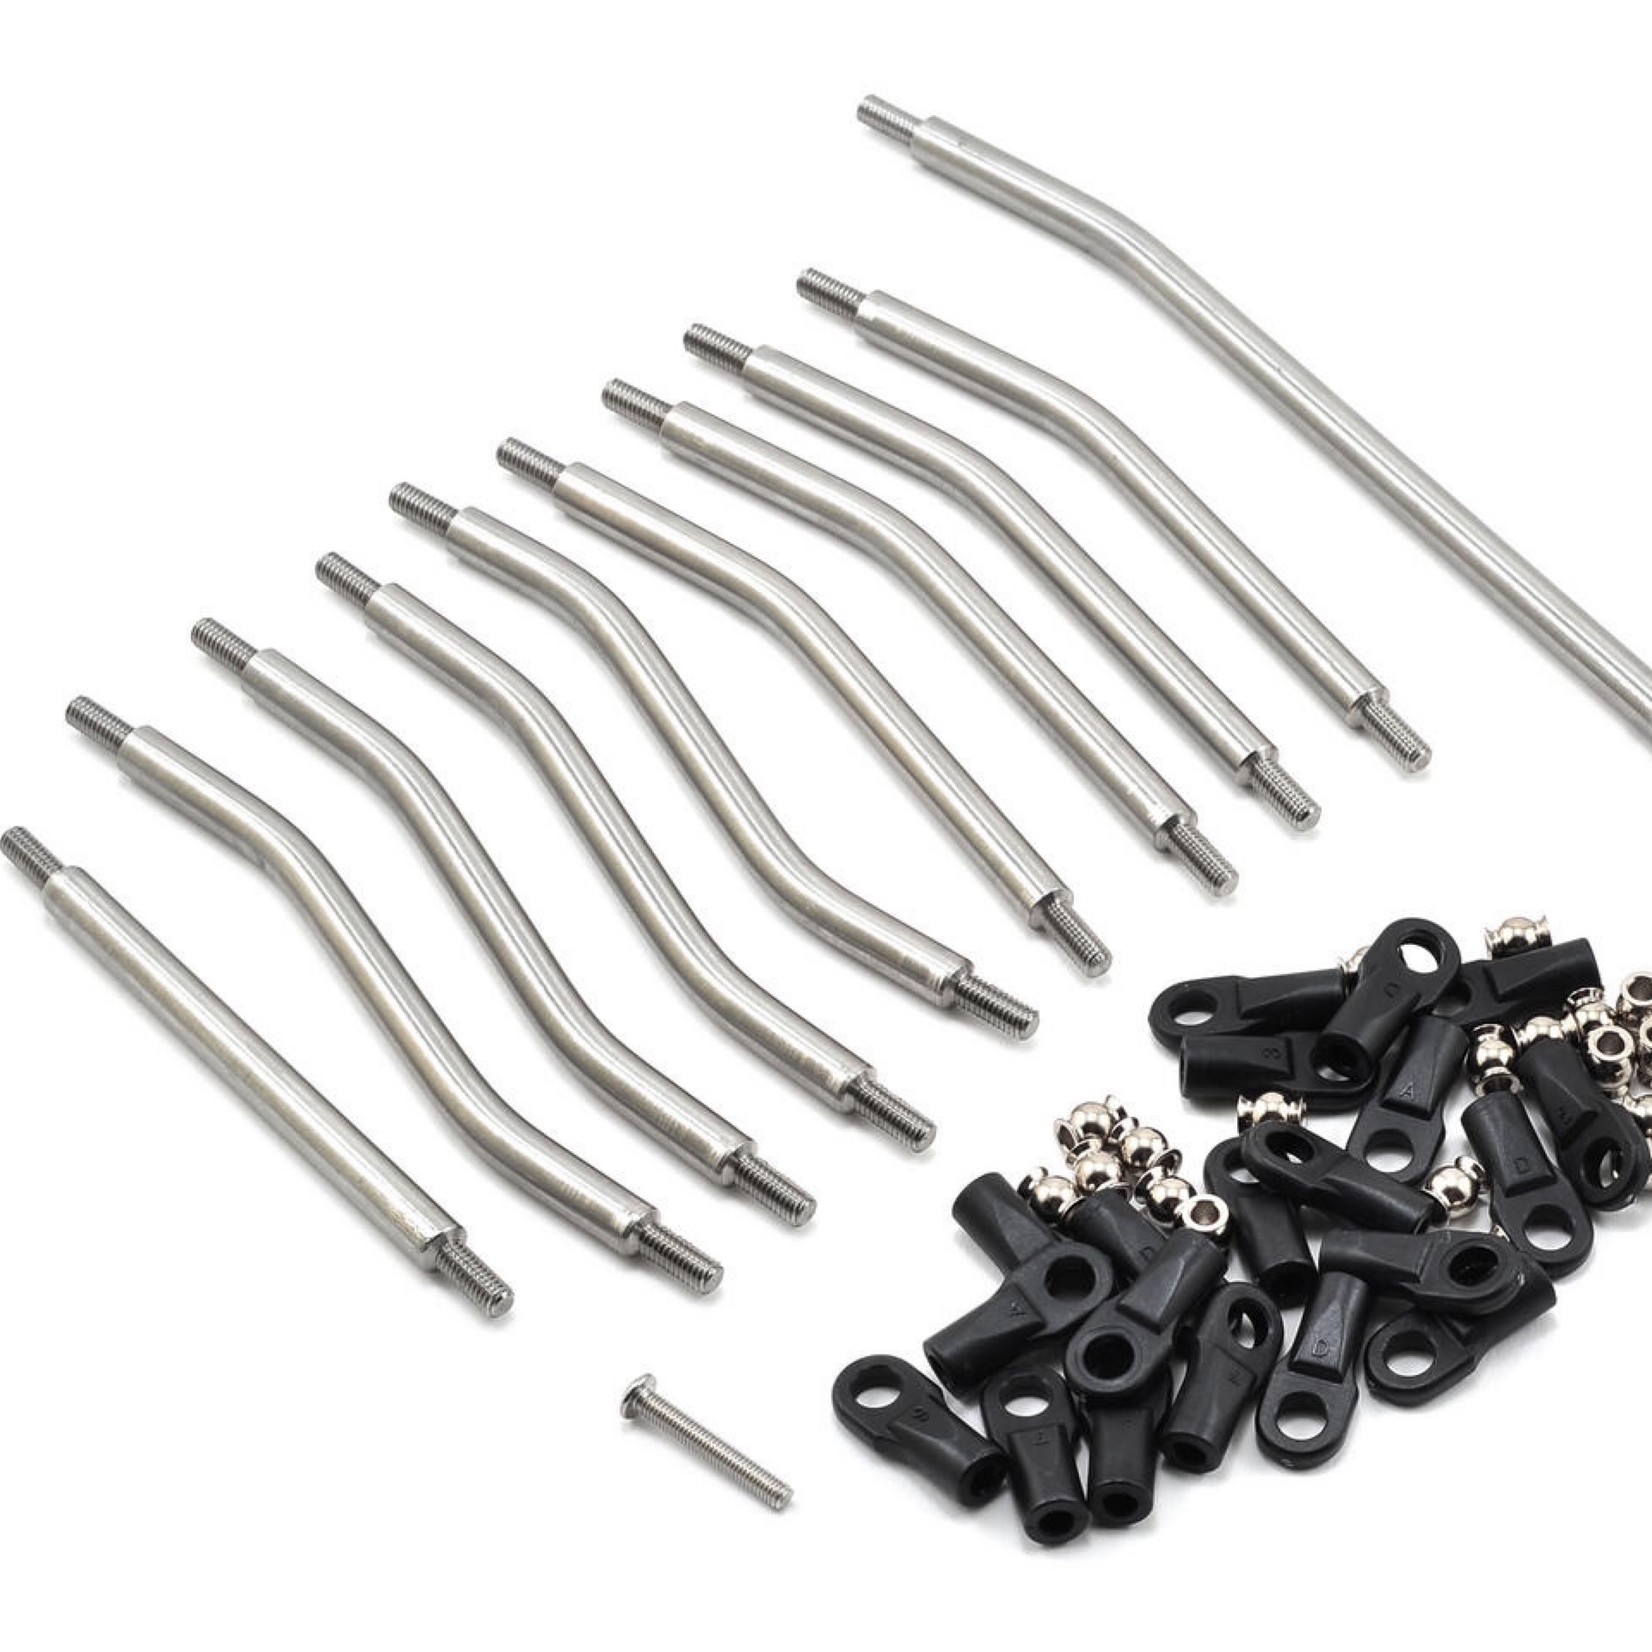 Incision Incision Wraith 1/4 Stainless Steel Link Set (10) #IRC00040